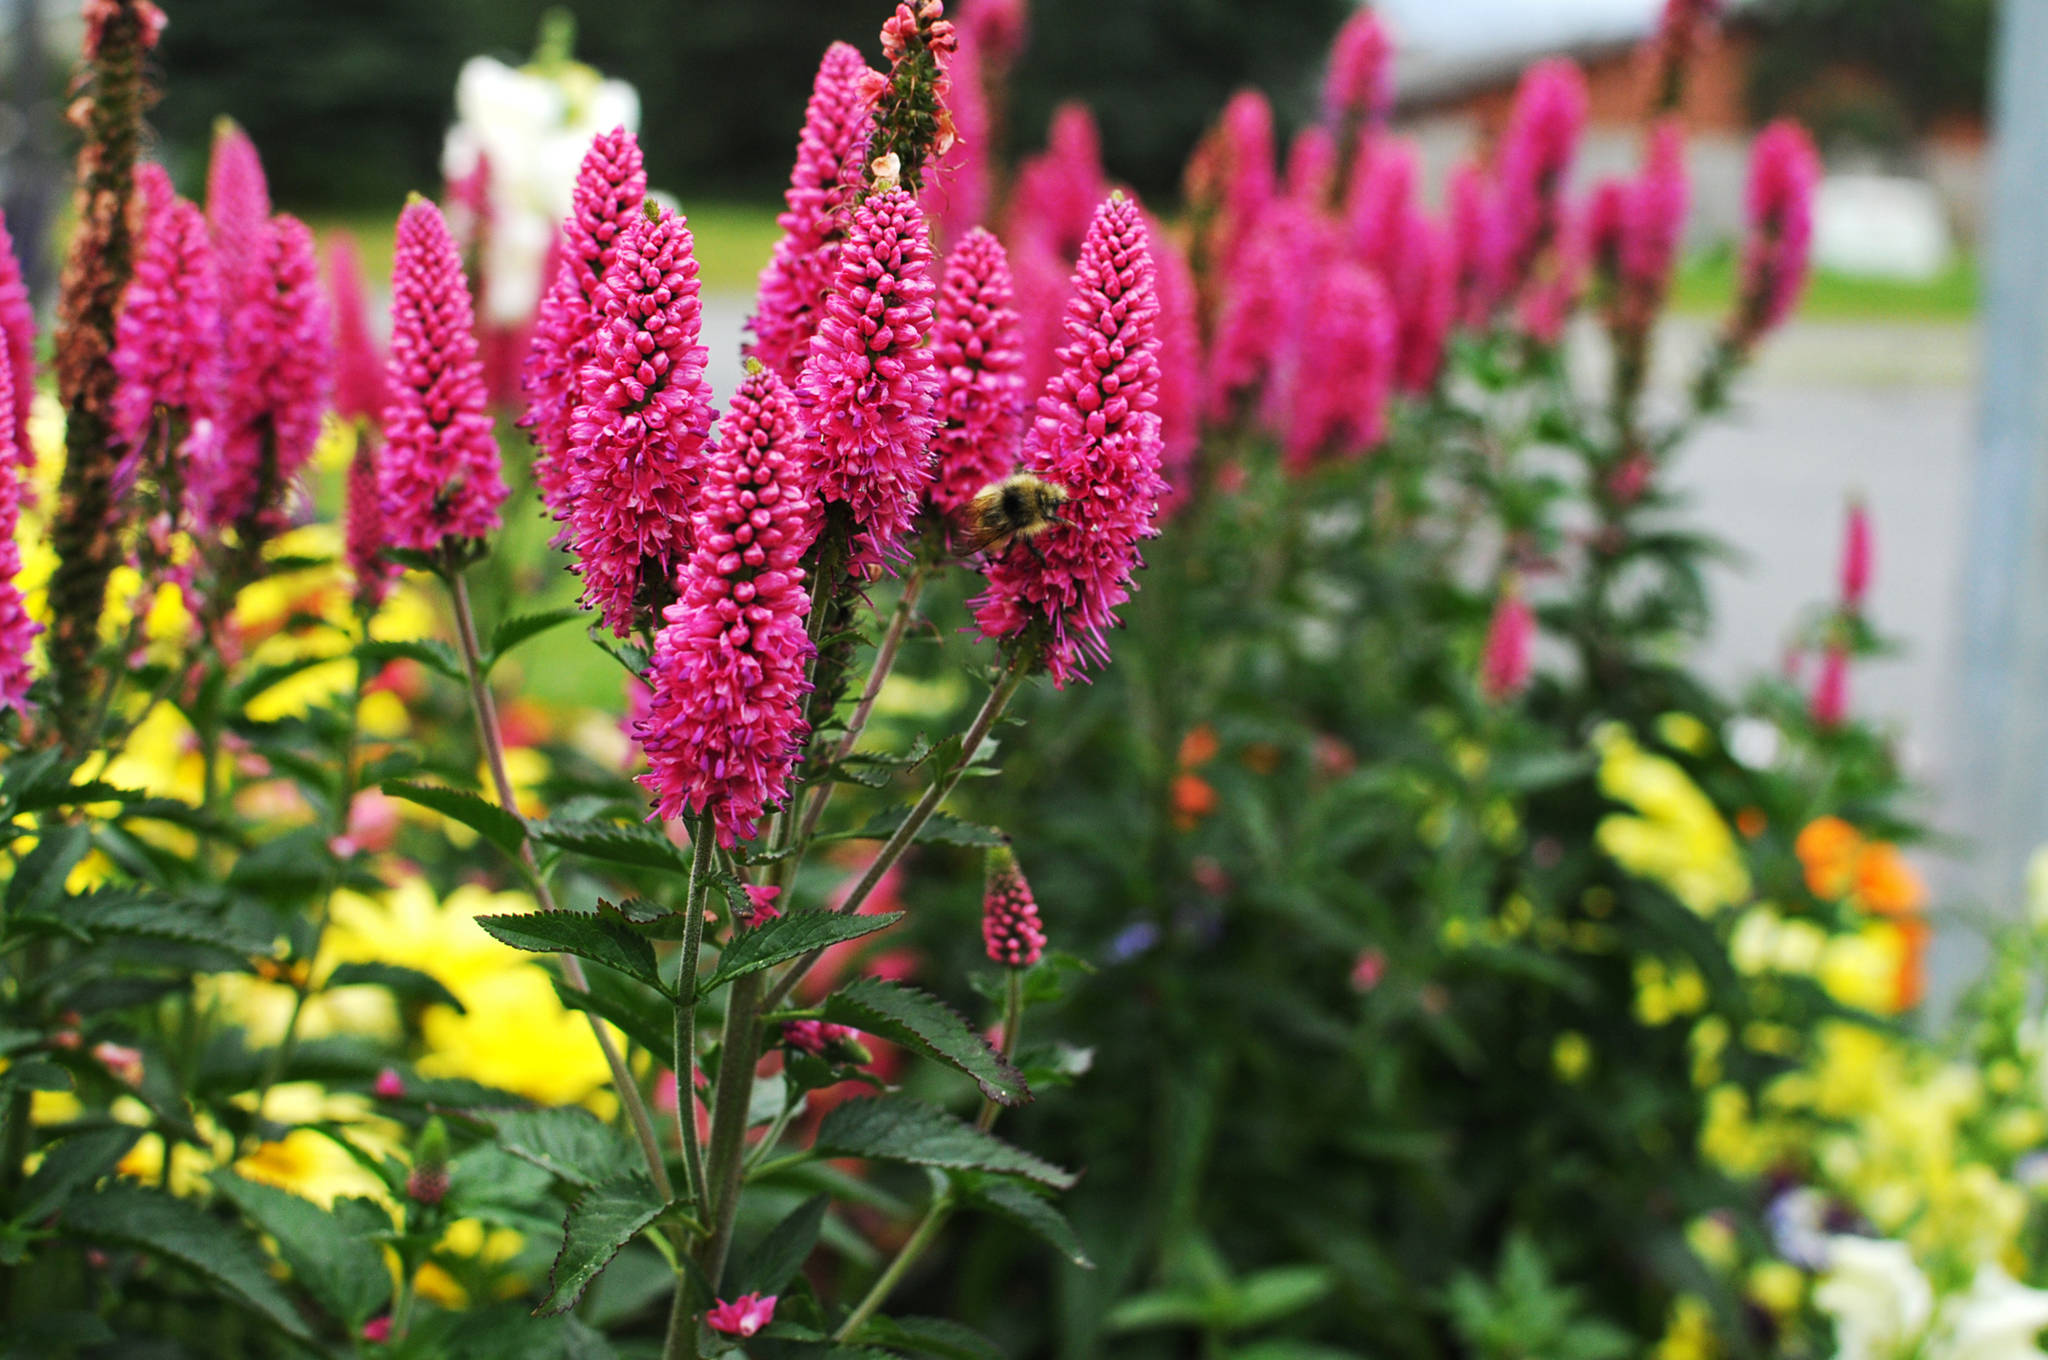 A honeybee enjoys the flowers on the front lawn of the Soldotna Senior Center on Tuesday, Aug. 1, 2017 in Soldotna, Alaska. Jan Fena, the director of the senior center, said the plants on the front lawn are all maintained by volunteers. (Photo by Elizabeth Earl/Peninsula Clarion)